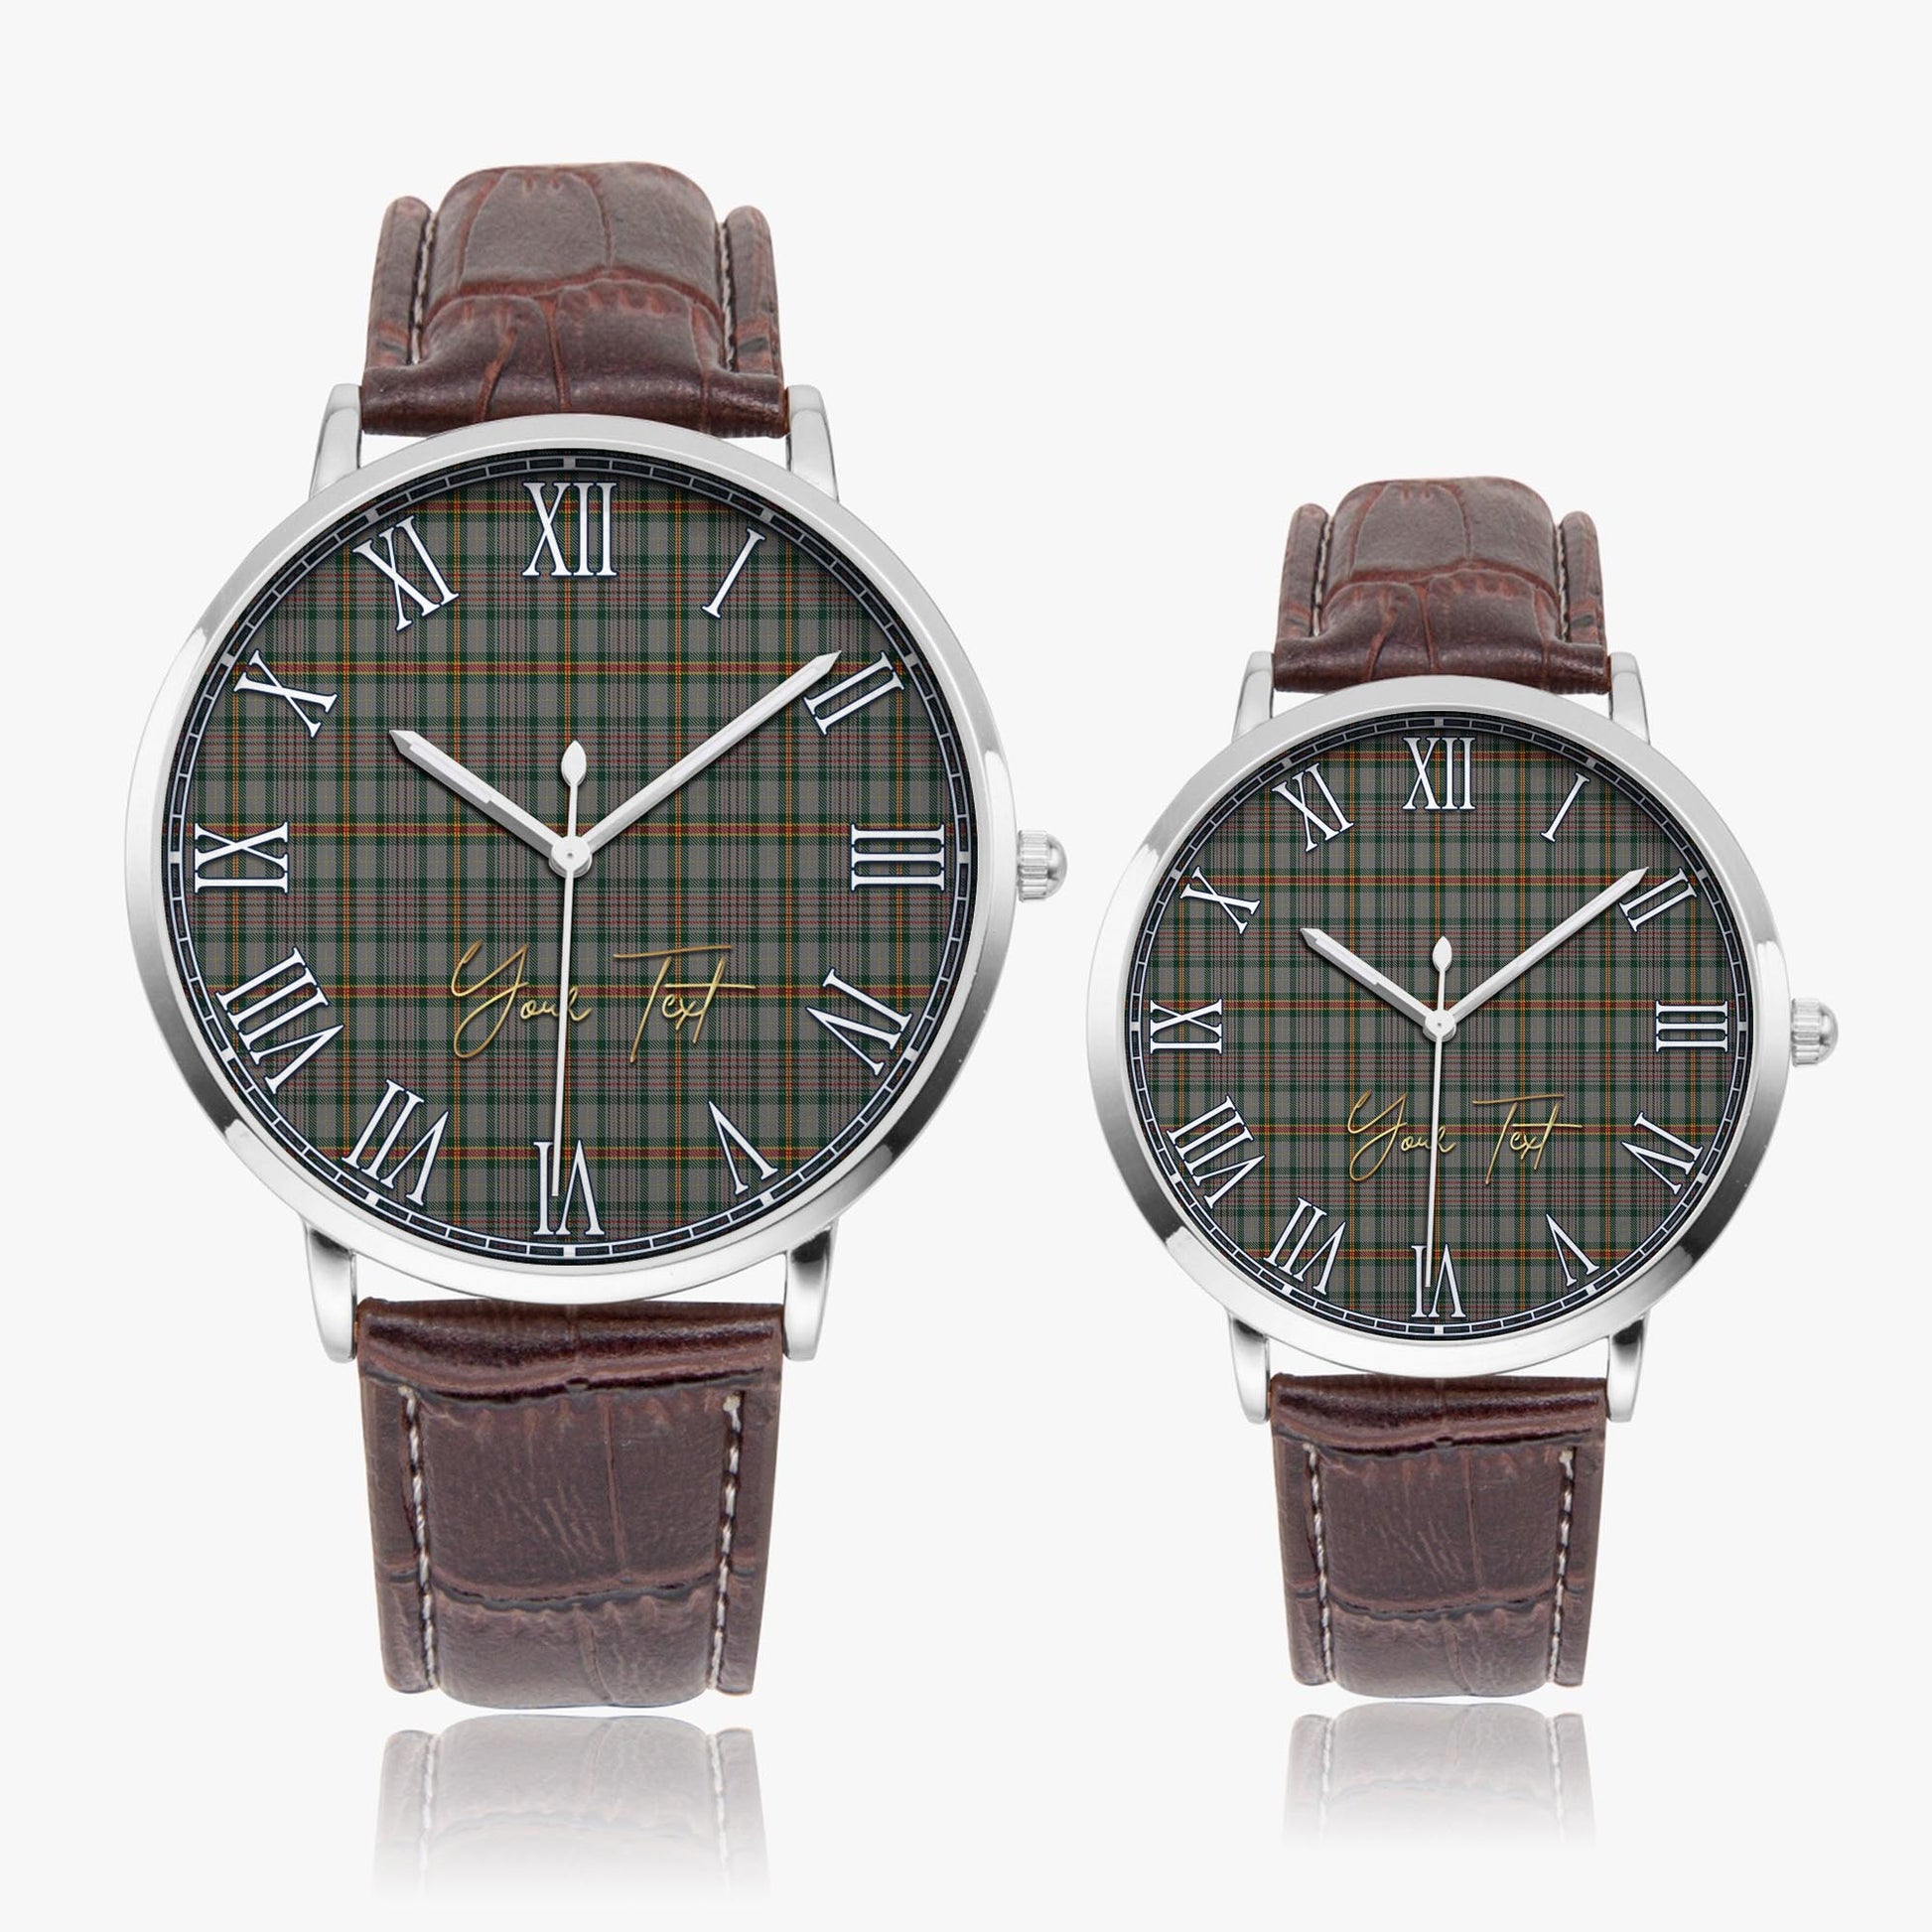 Howell of Wales Tartan Personalized Your Text Leather Trap Quartz Watch Ultra Thin Silver Case With Brown Leather Strap - Tartanvibesclothing